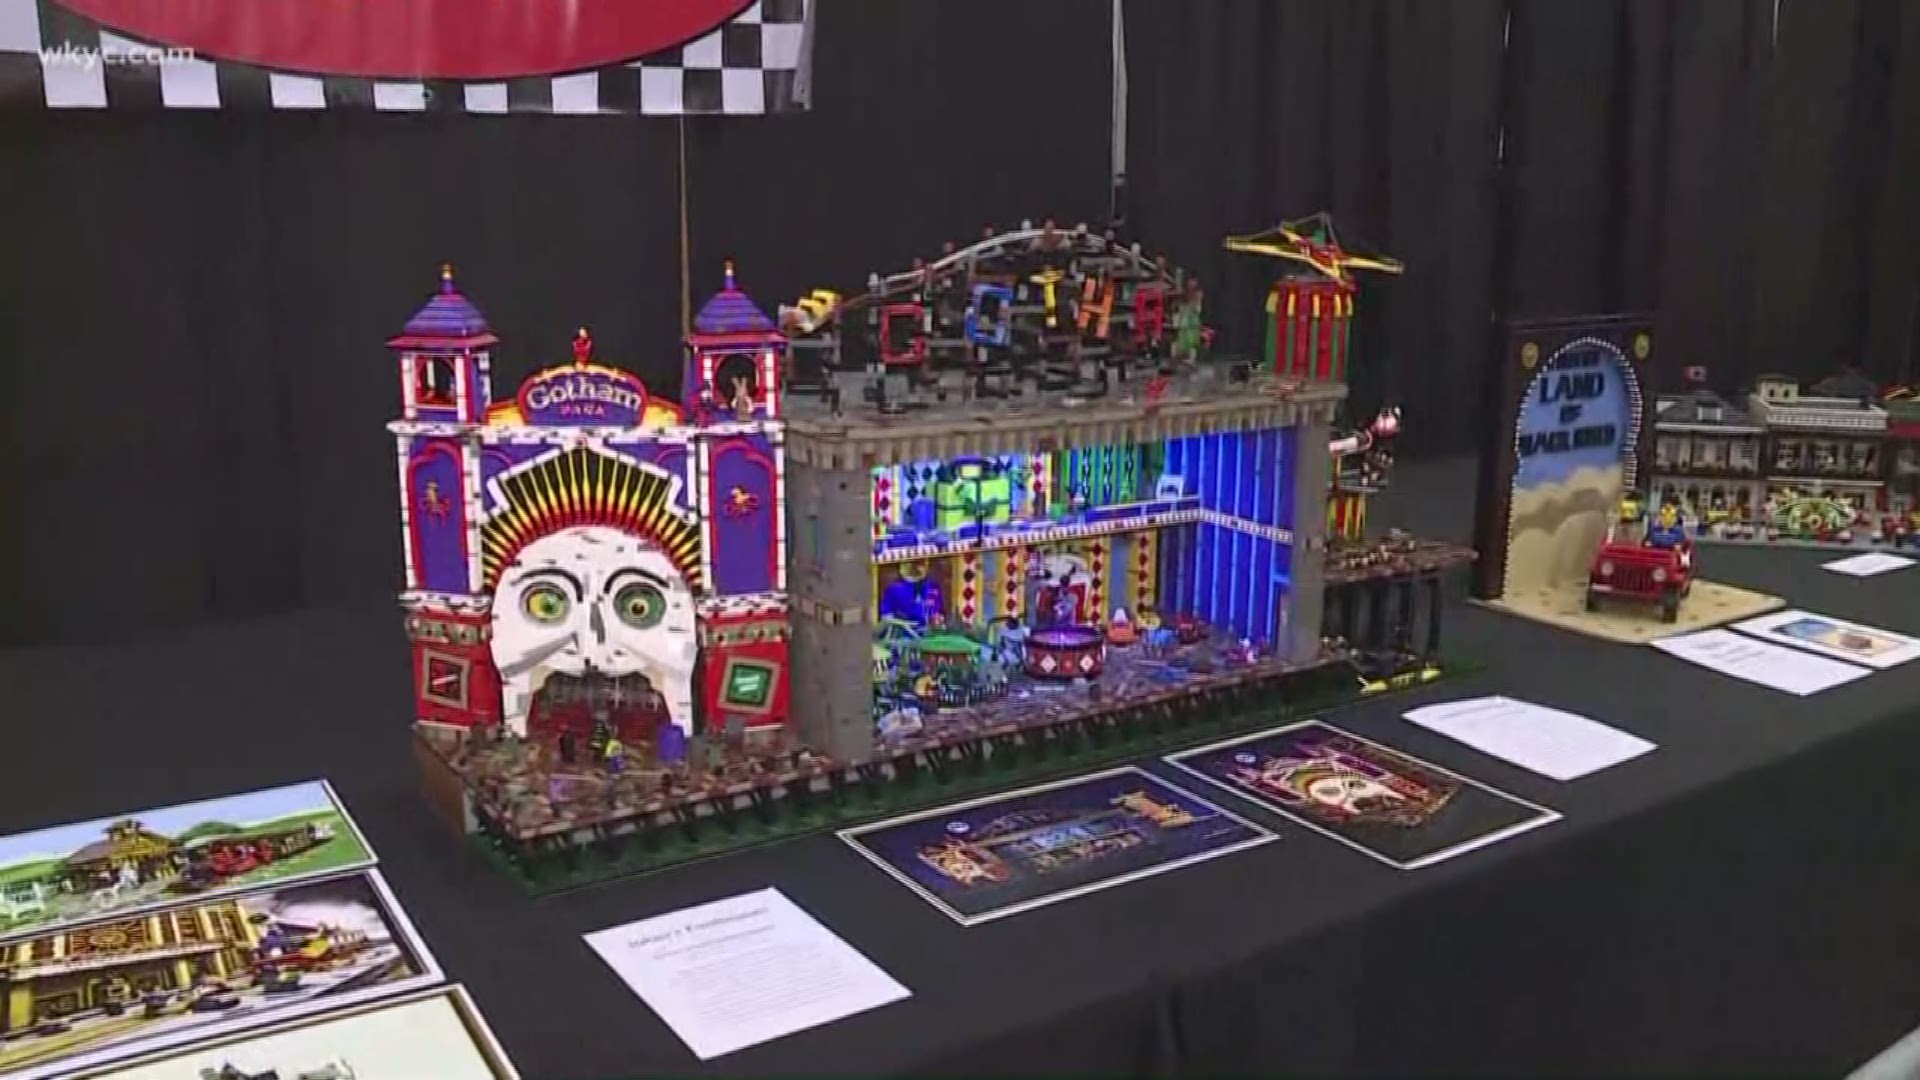 LEGO artist Paul Hetherington talks about the displays he created, which are showcased at the Cleveland stop of the BrickUniverse Convention For LEGO Fans.